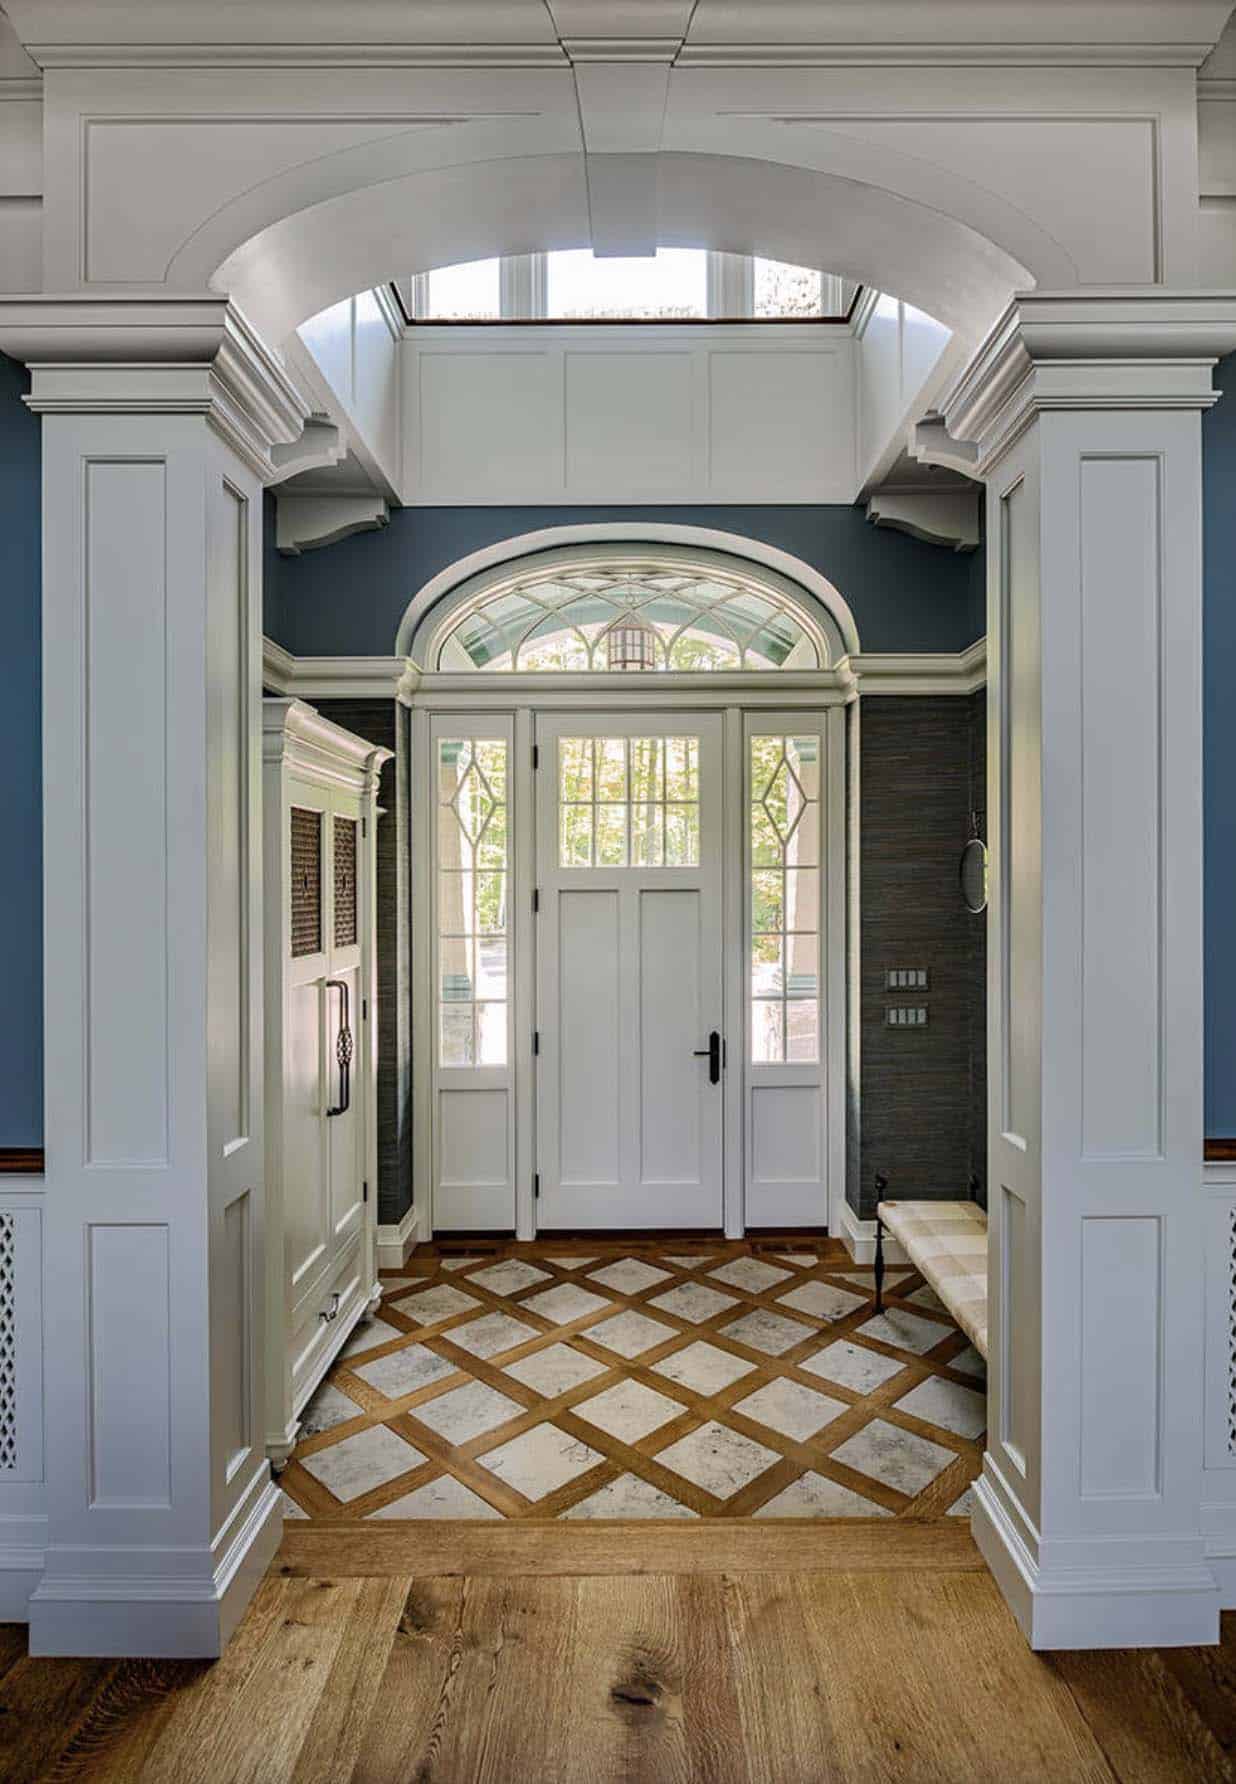 grand-home-entryway-with-tile-and-wood-flooring